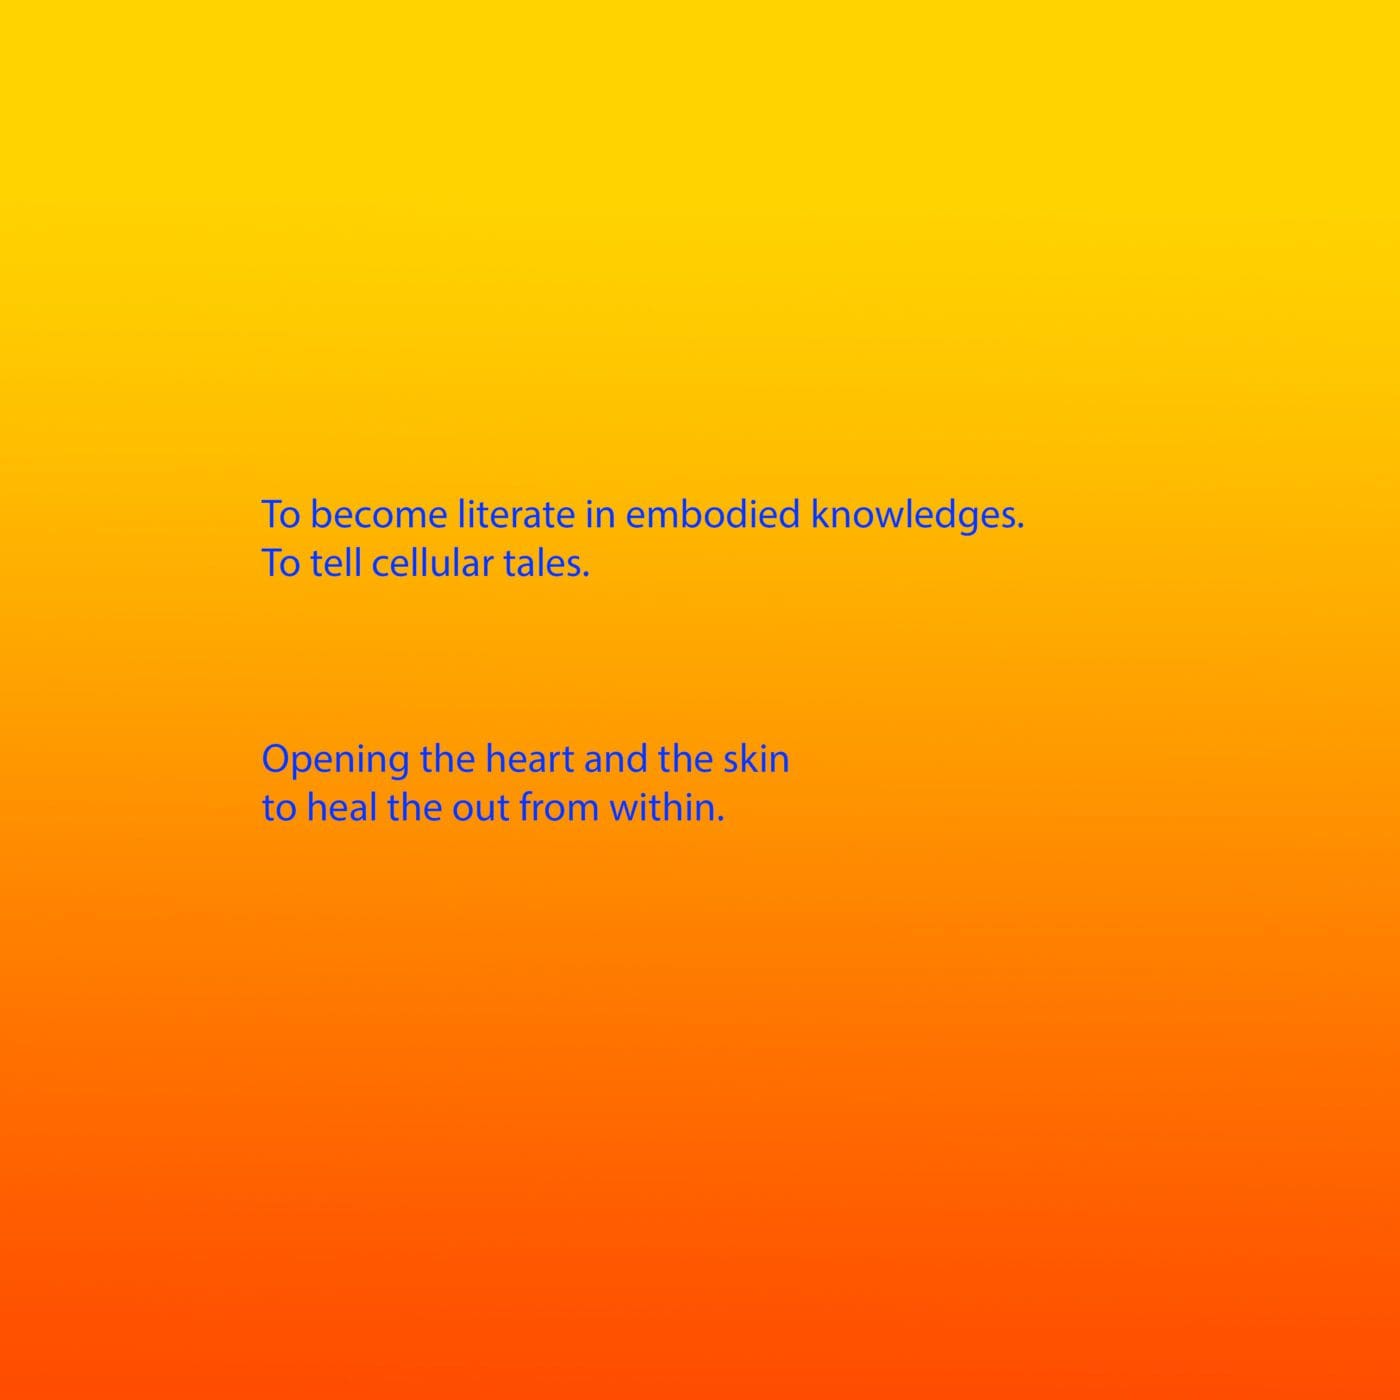 Bright blue text appears on a background that is a gradient from yellow, through orange to red. The text reads: To become literate in embodied knowledges. To tell cellular tales. Opening the heart and the skin to heal the out from within.